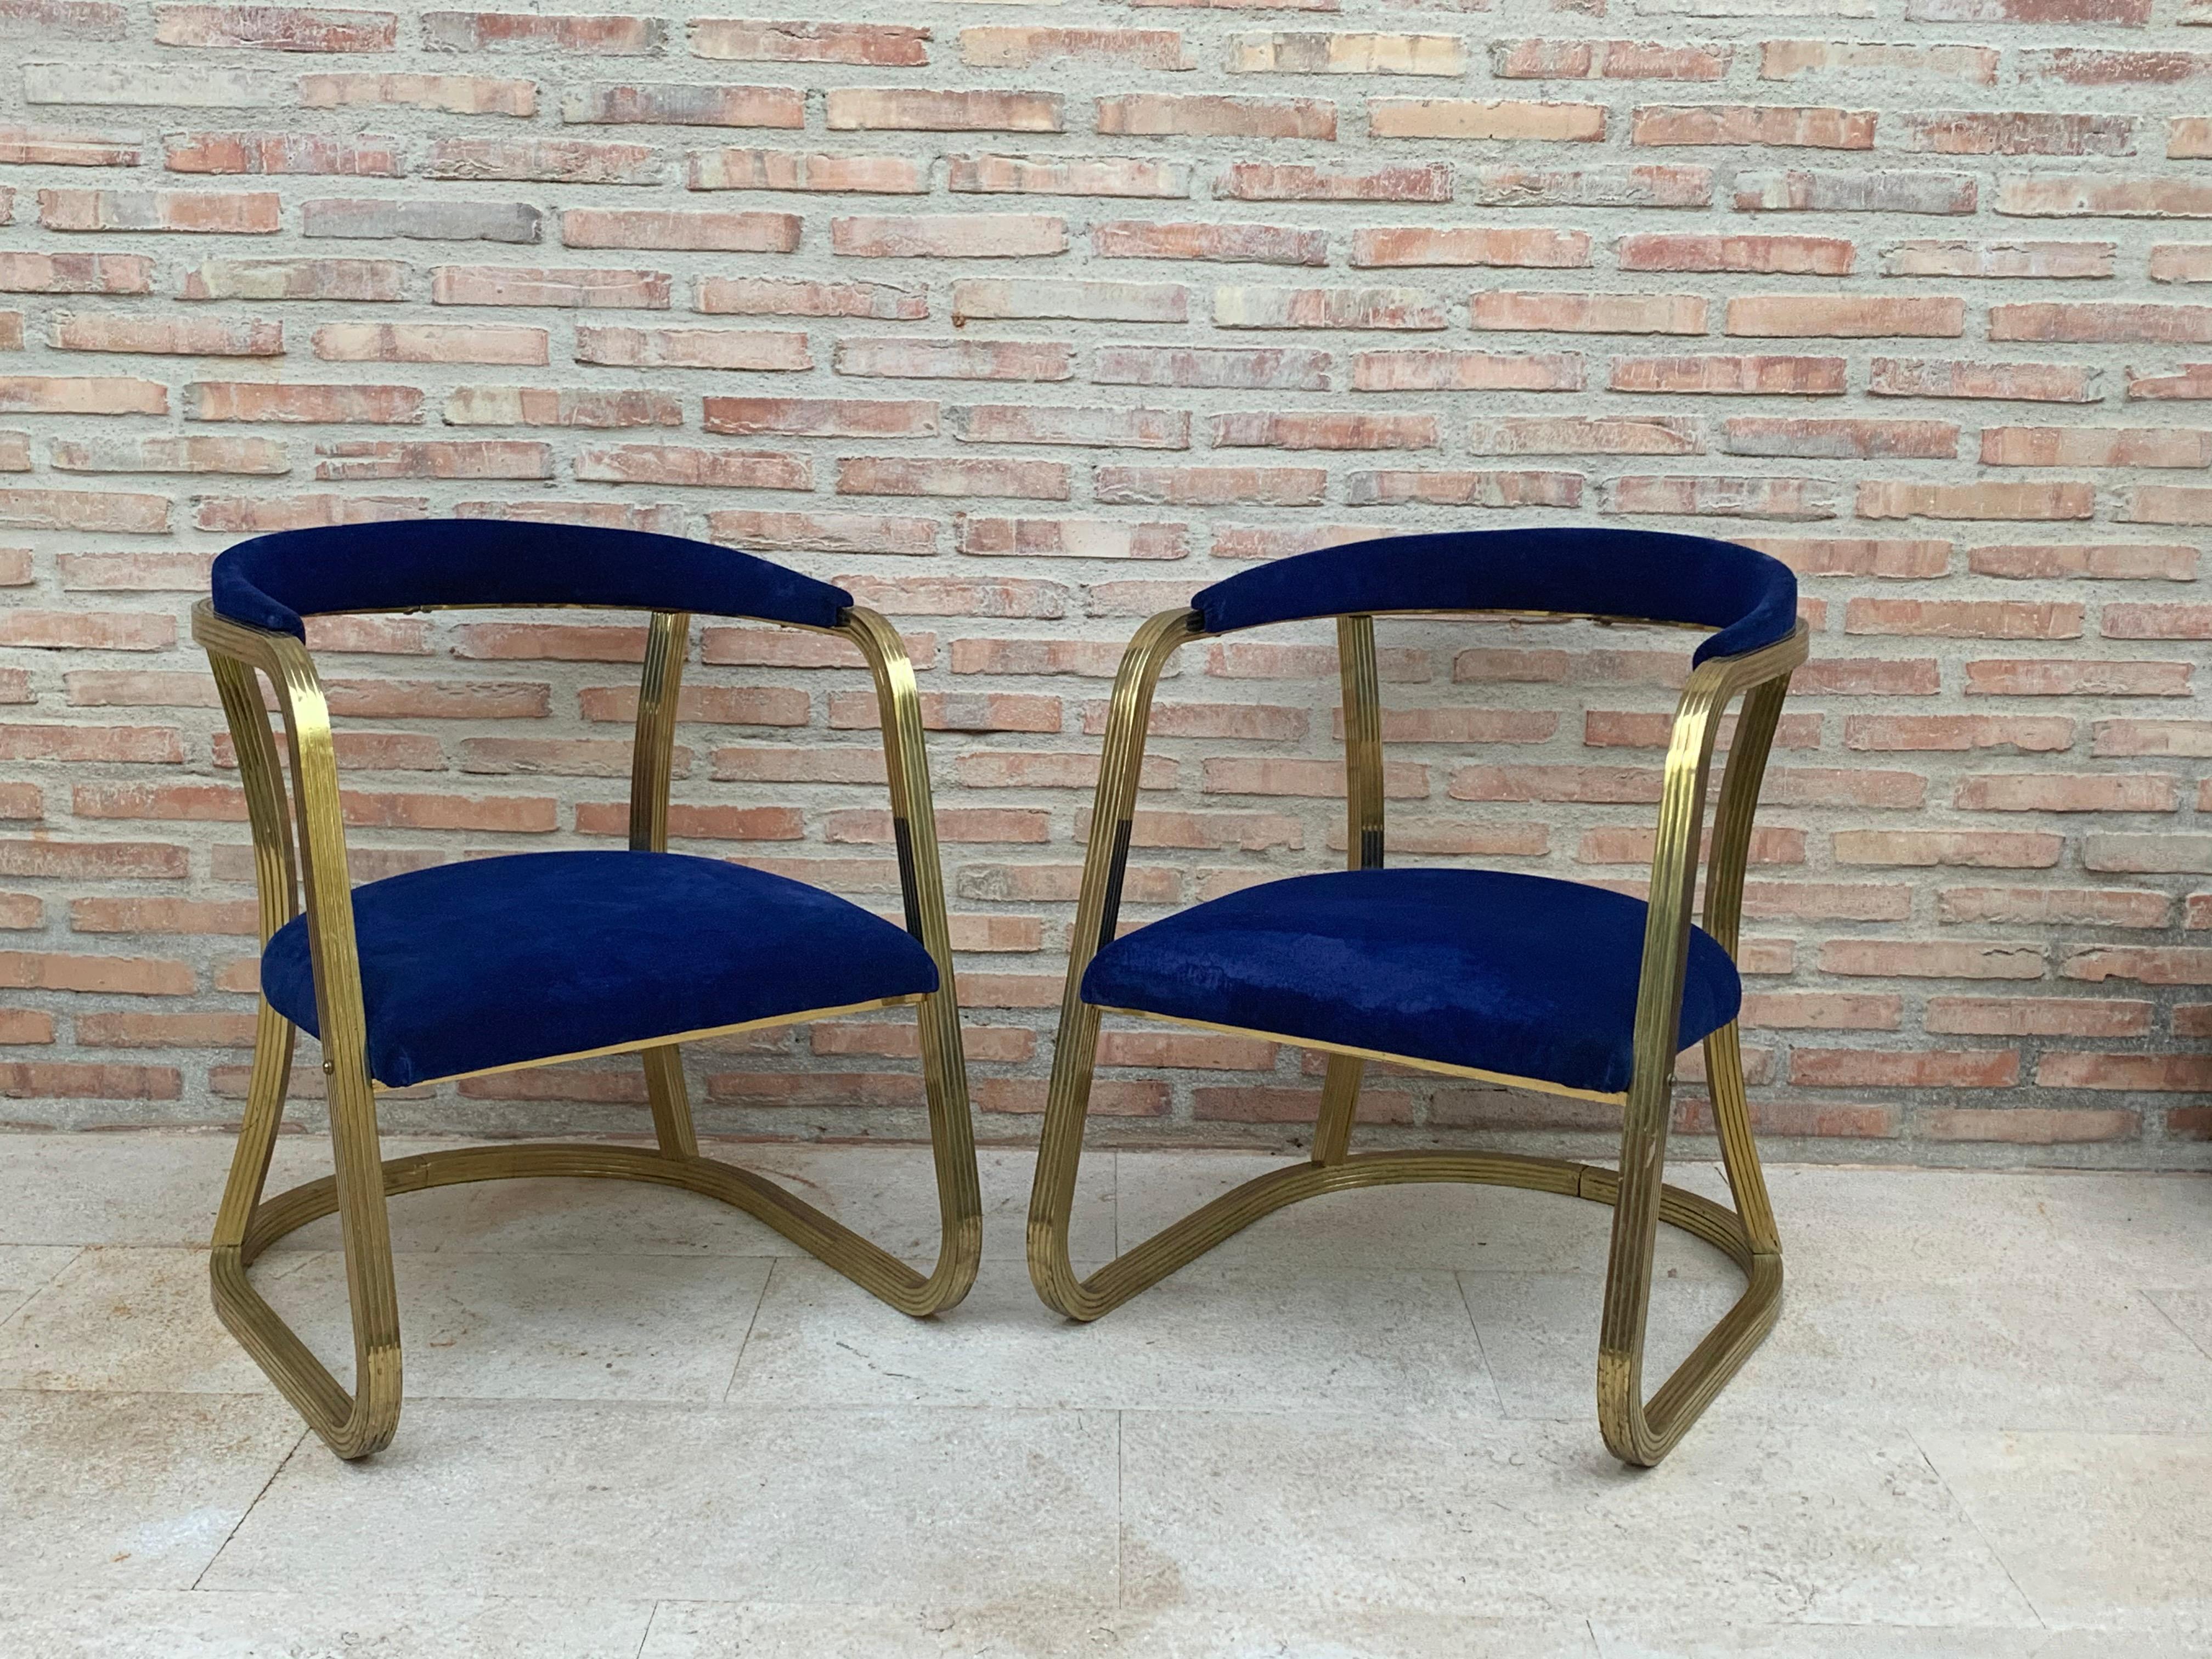 20th Century French Pair of Midcentury Gold Brass Chairs with Blue Velvet Upholstery For Sale